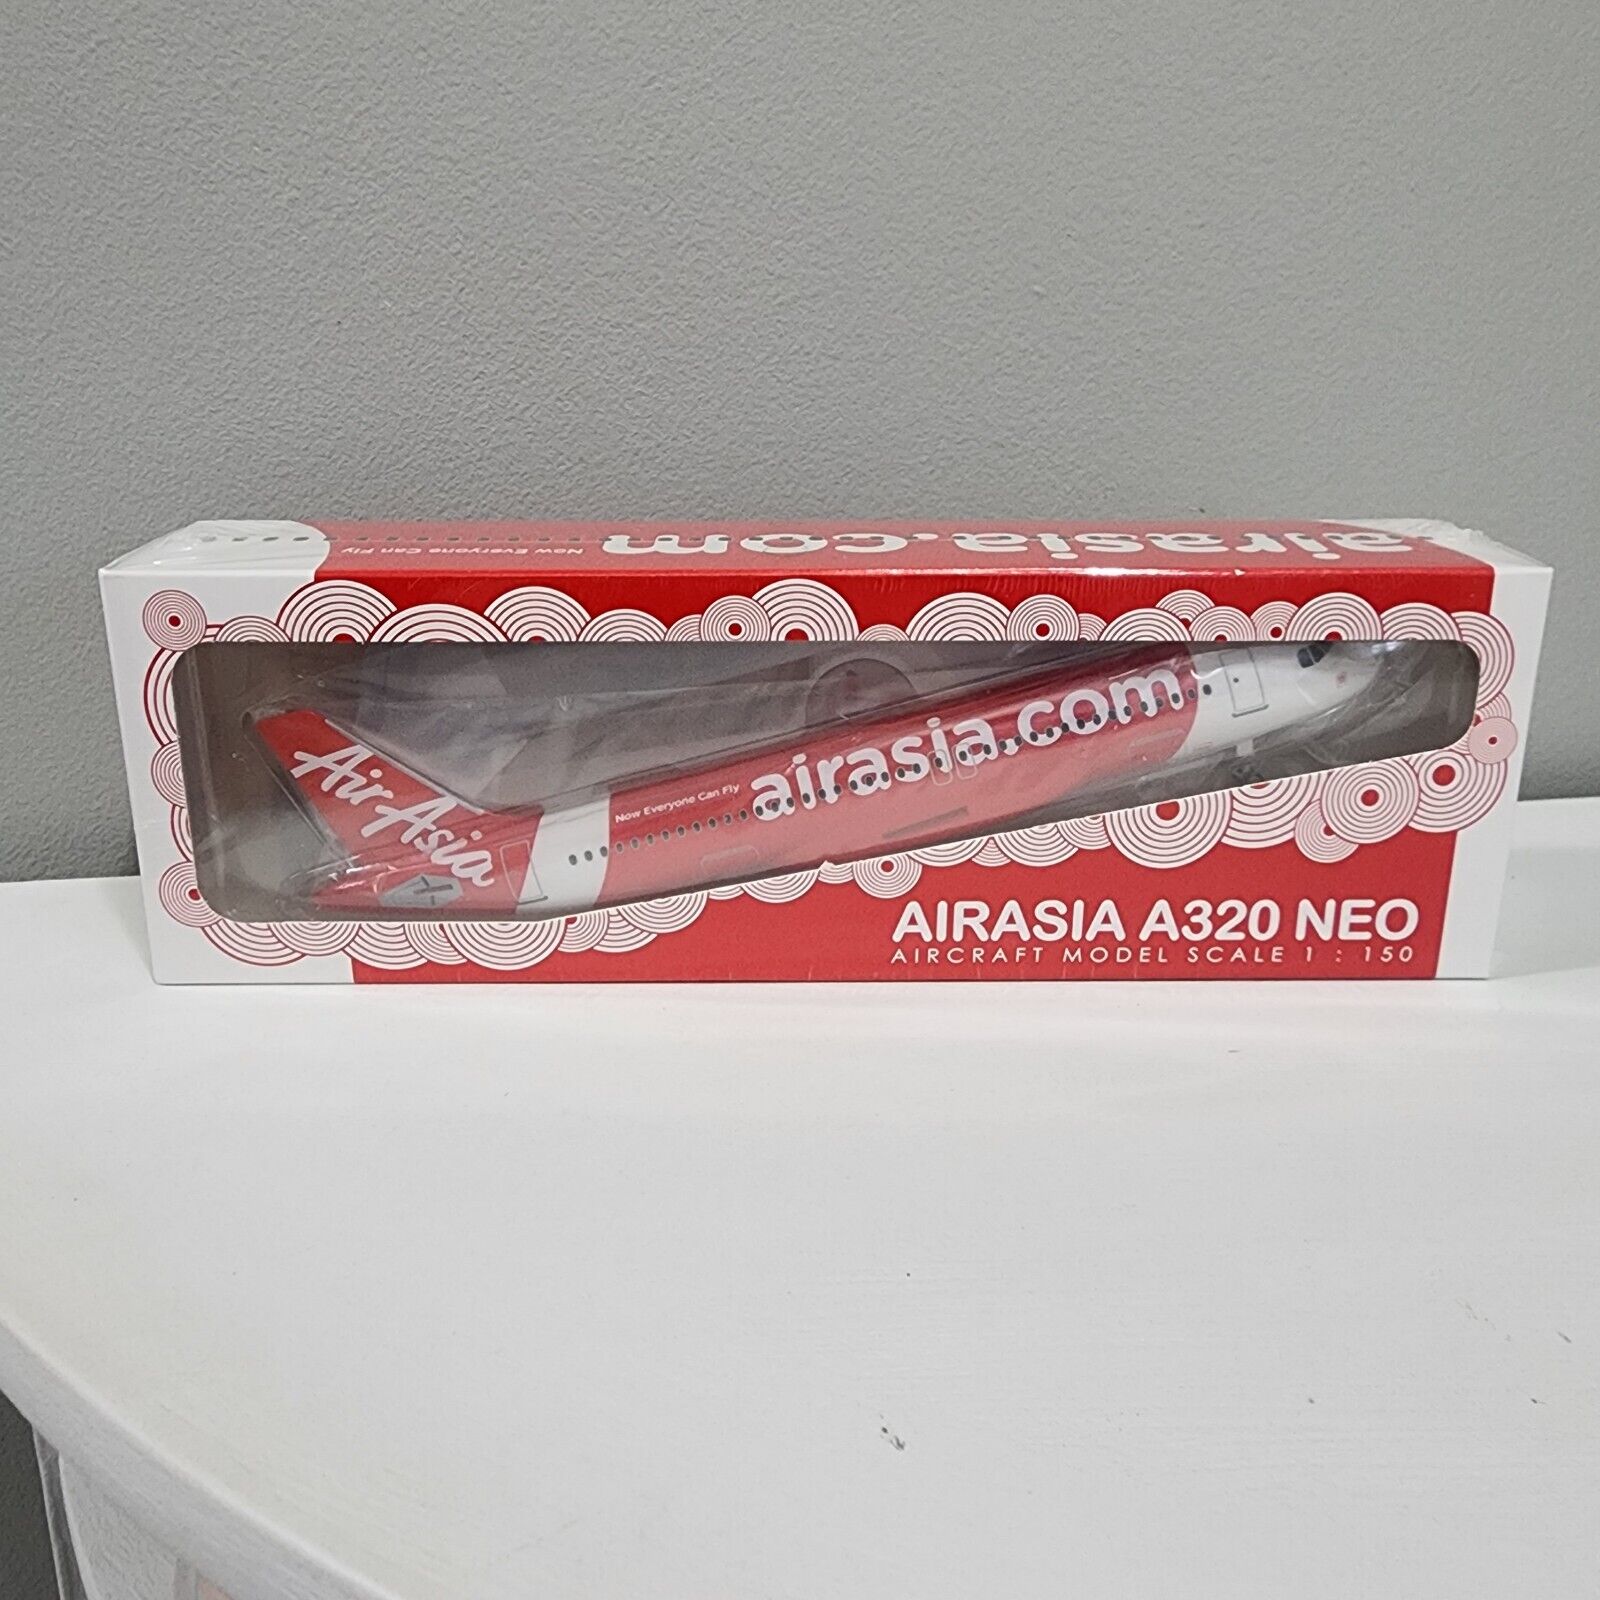 Air Asia A320 NEO Replica Model 1:150 Scale Airbus Passenger Airplane Jet